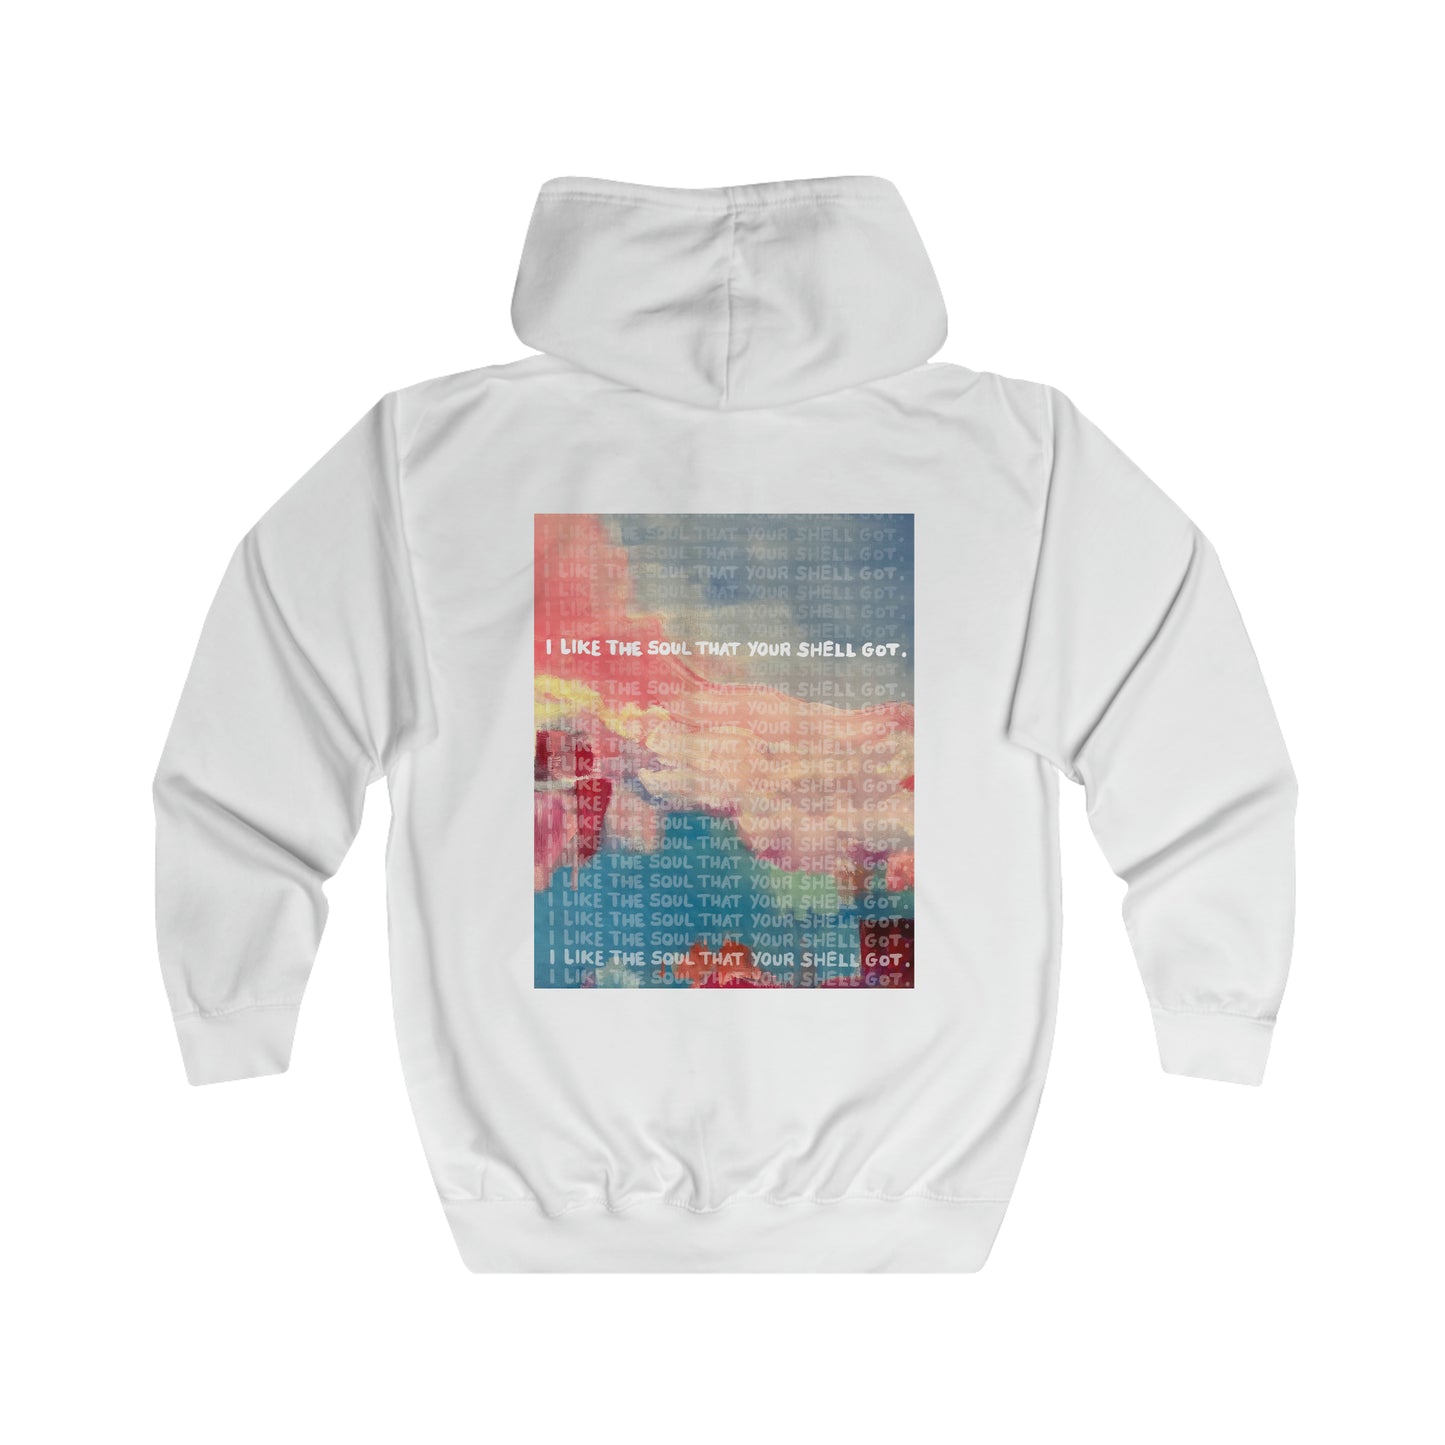 I Like The Soul That Your Shell Got - full zip hoodie x Sarah Words Collection